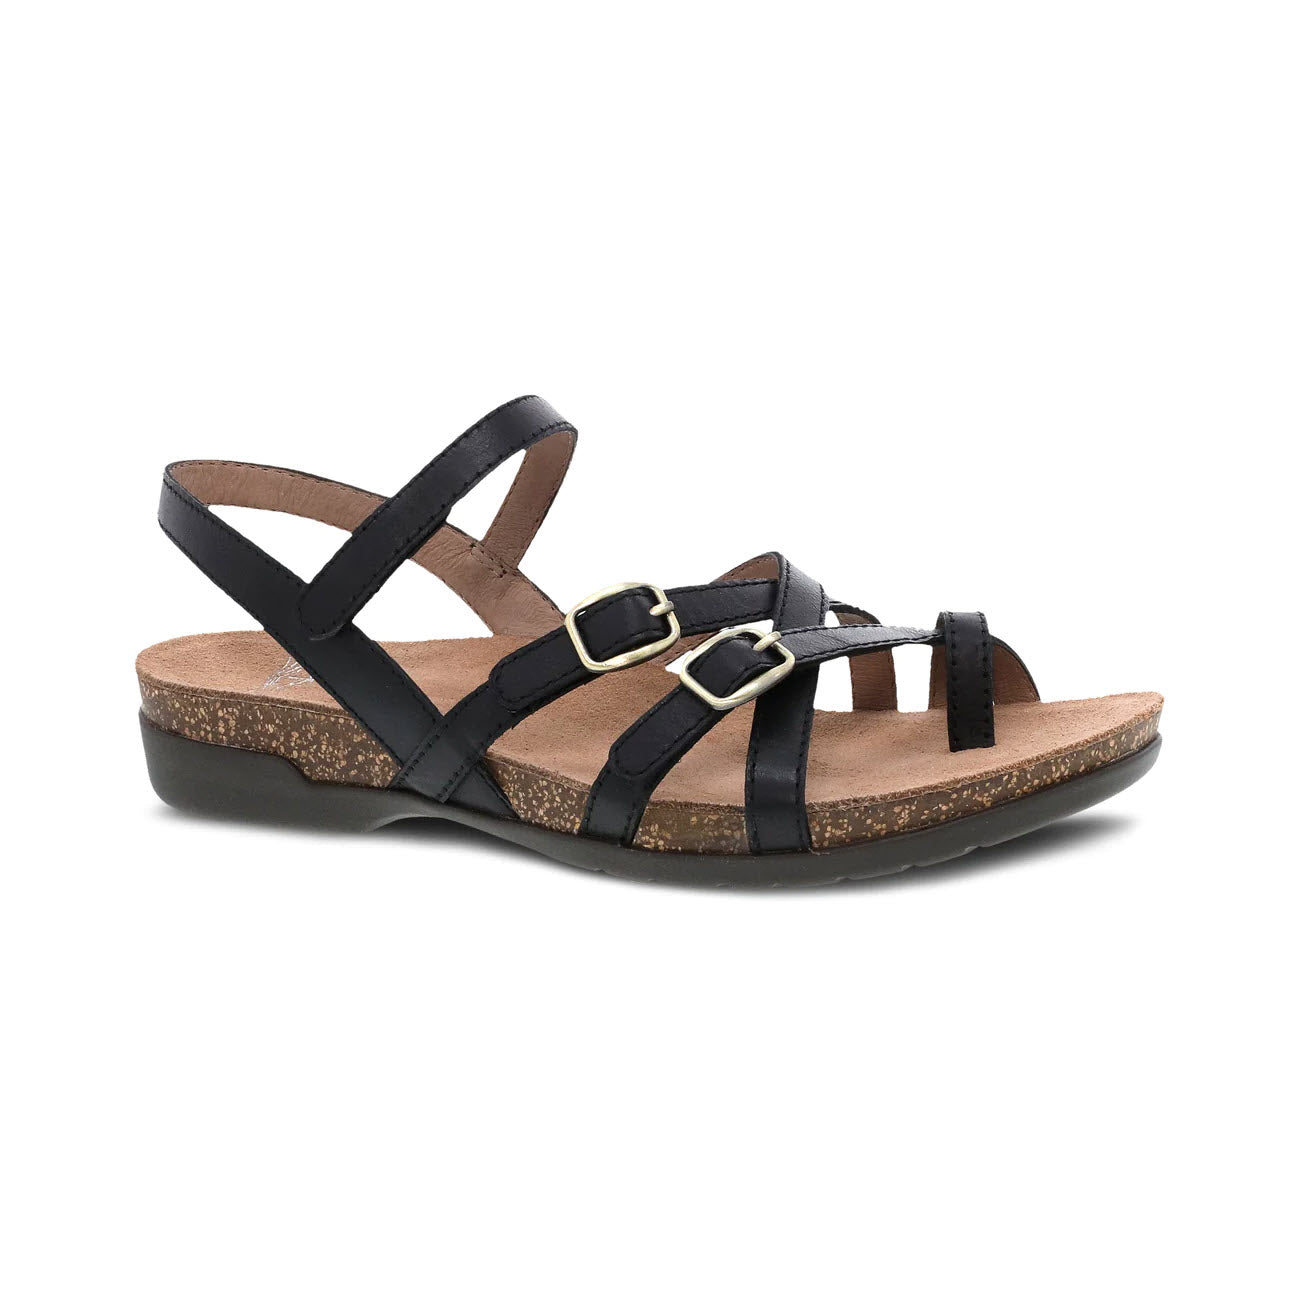 Dansko Roslyn Black supportive strappy women's sandal with buckle detail on a white background.